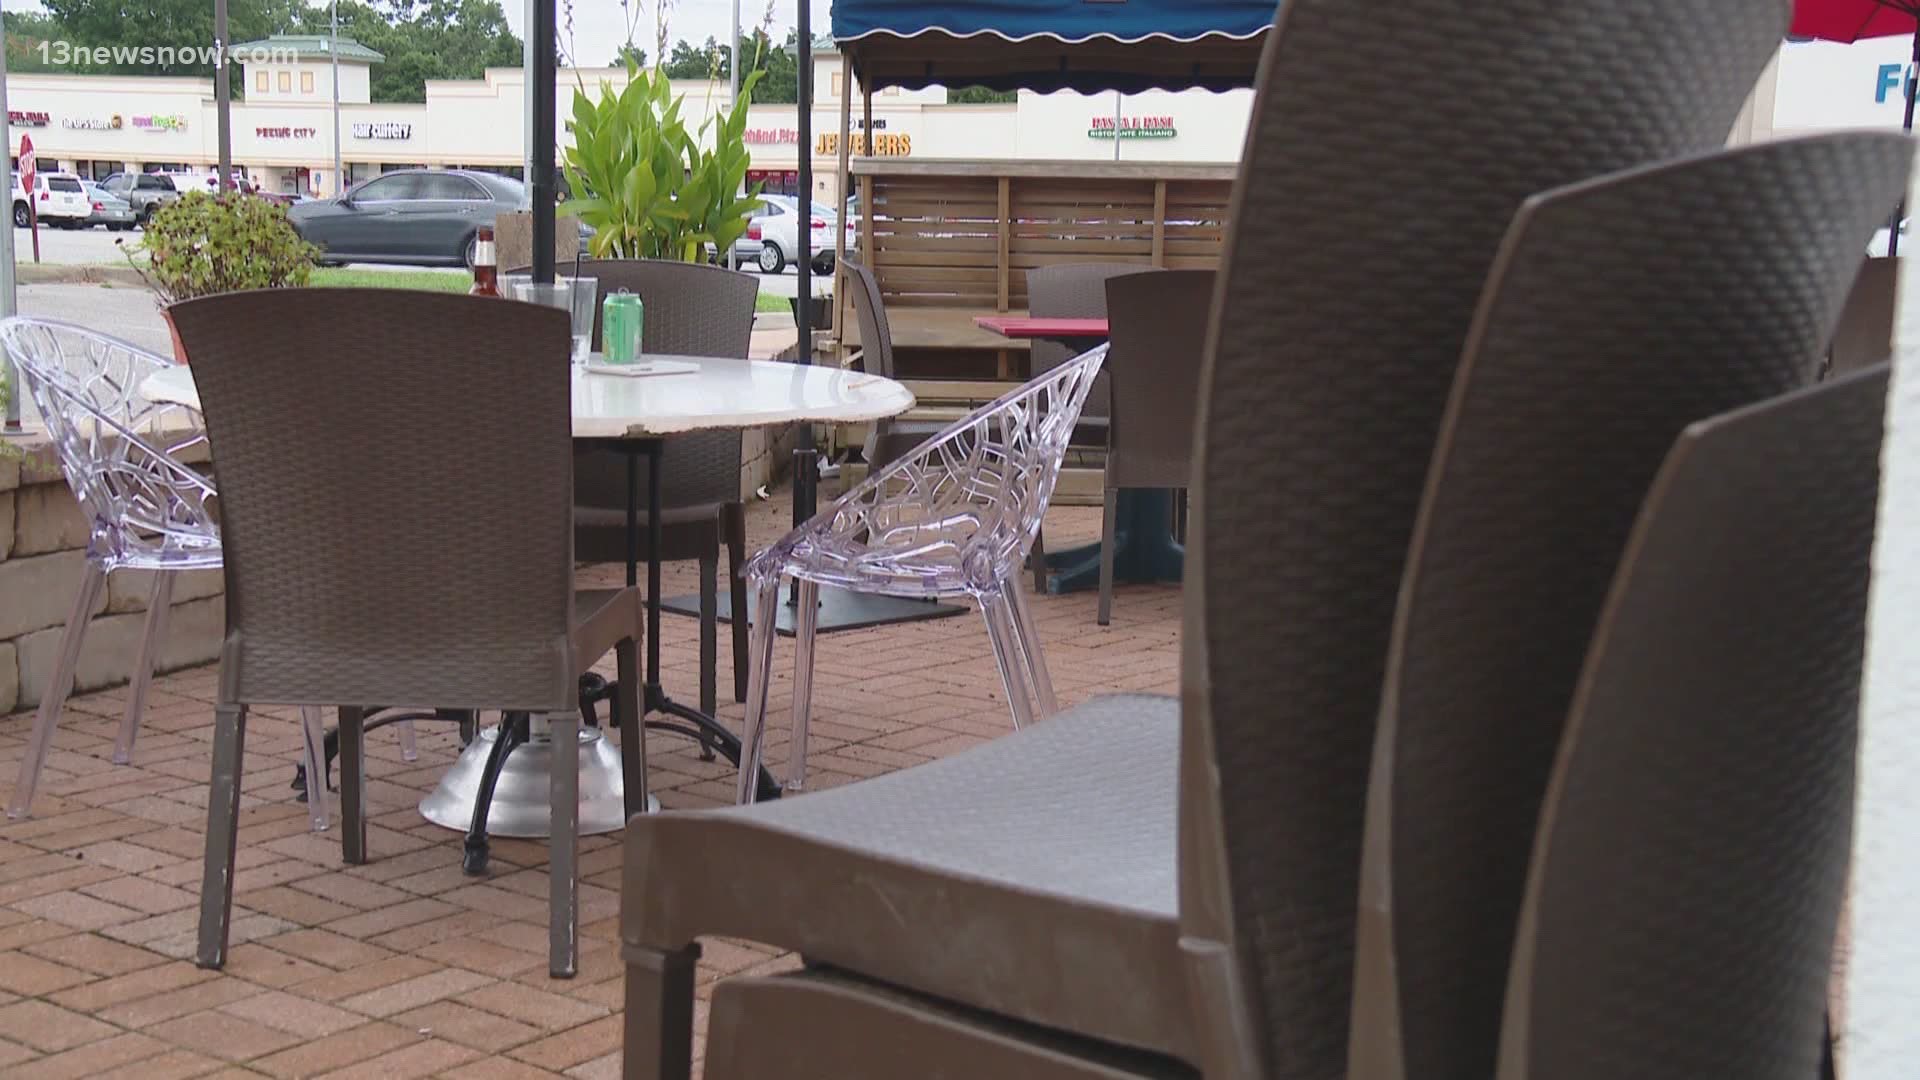 13News Now Connor Rhiel spoke with some local businesses about how they're working to stay open even with COVID-19 health regulations in place.